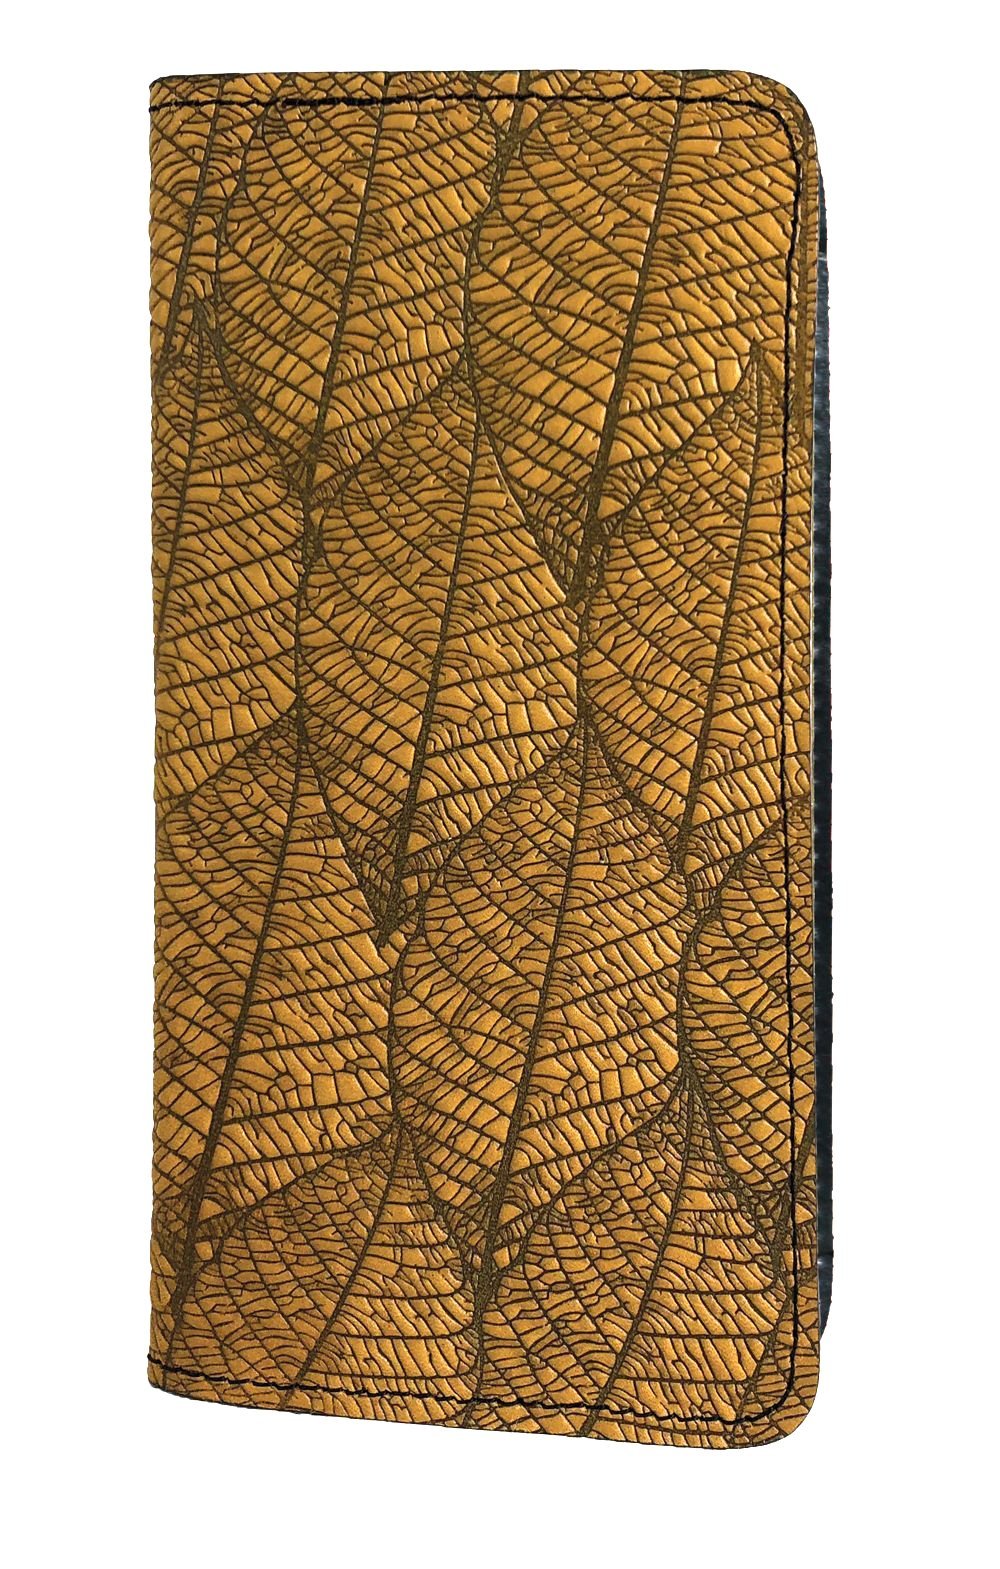 ecolemamie Small ecolemamie Small Leather Smartphone Wallet Case, Fallen Leaves in Marigold